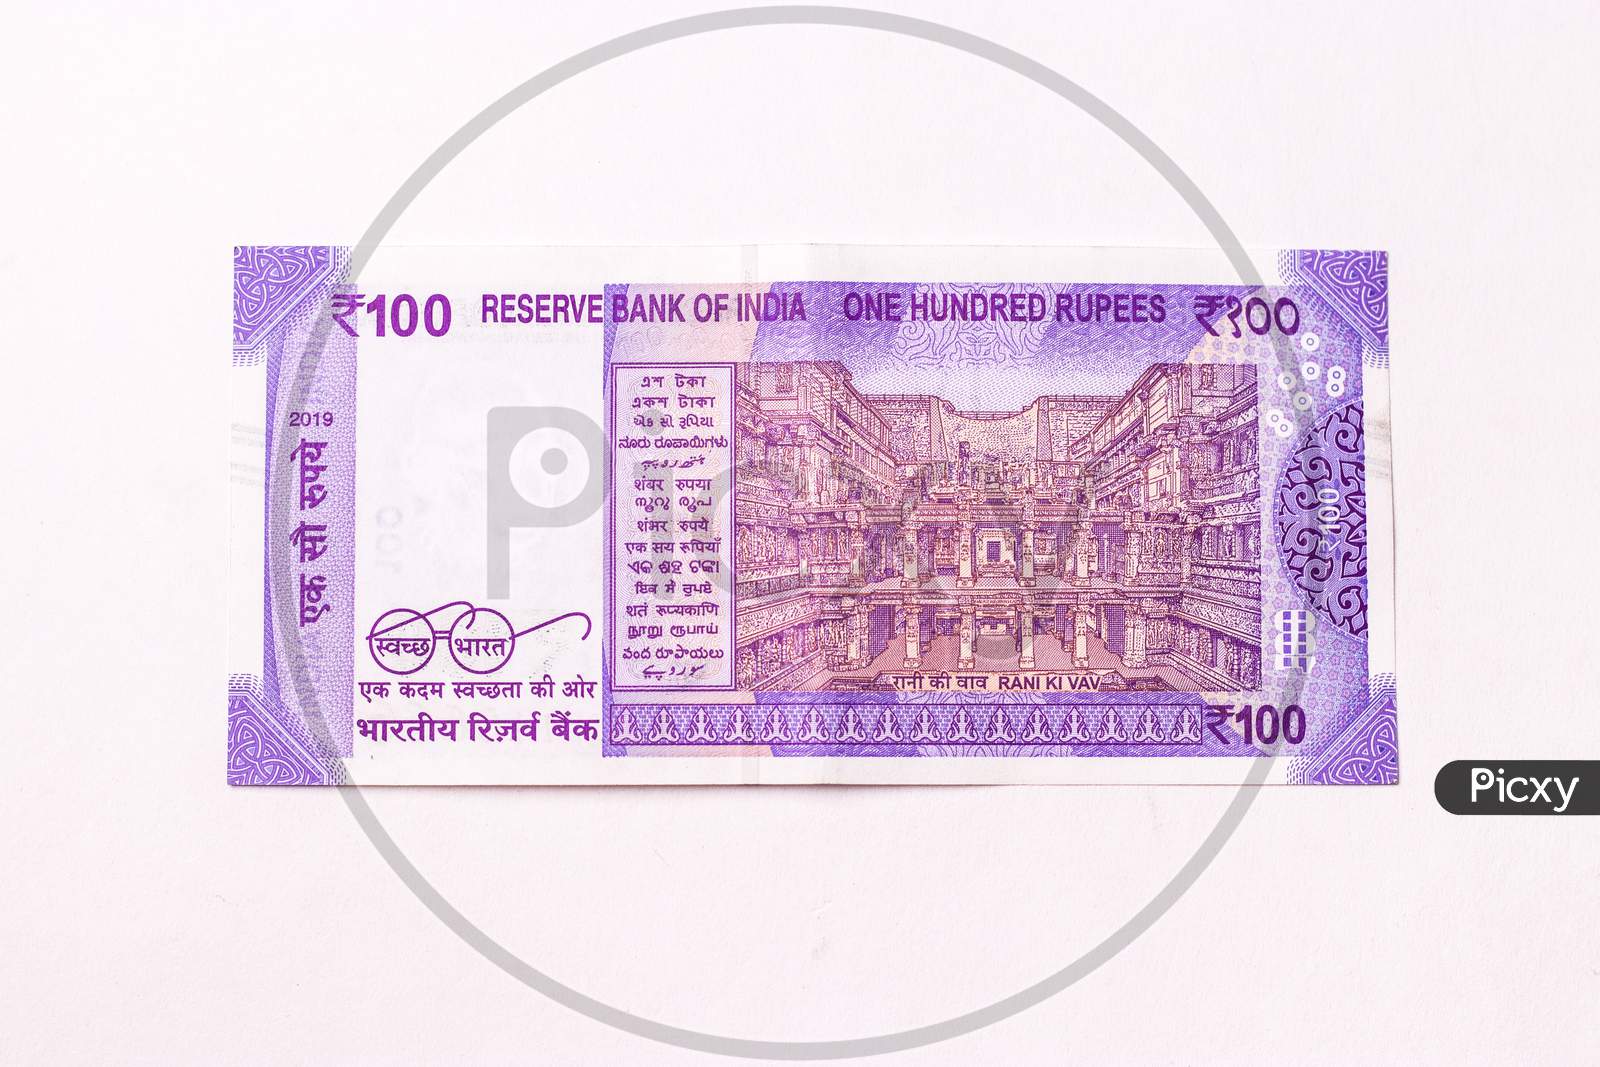 Assam, india - March 30, 2021 : Indian 100 Rupees note stock image.